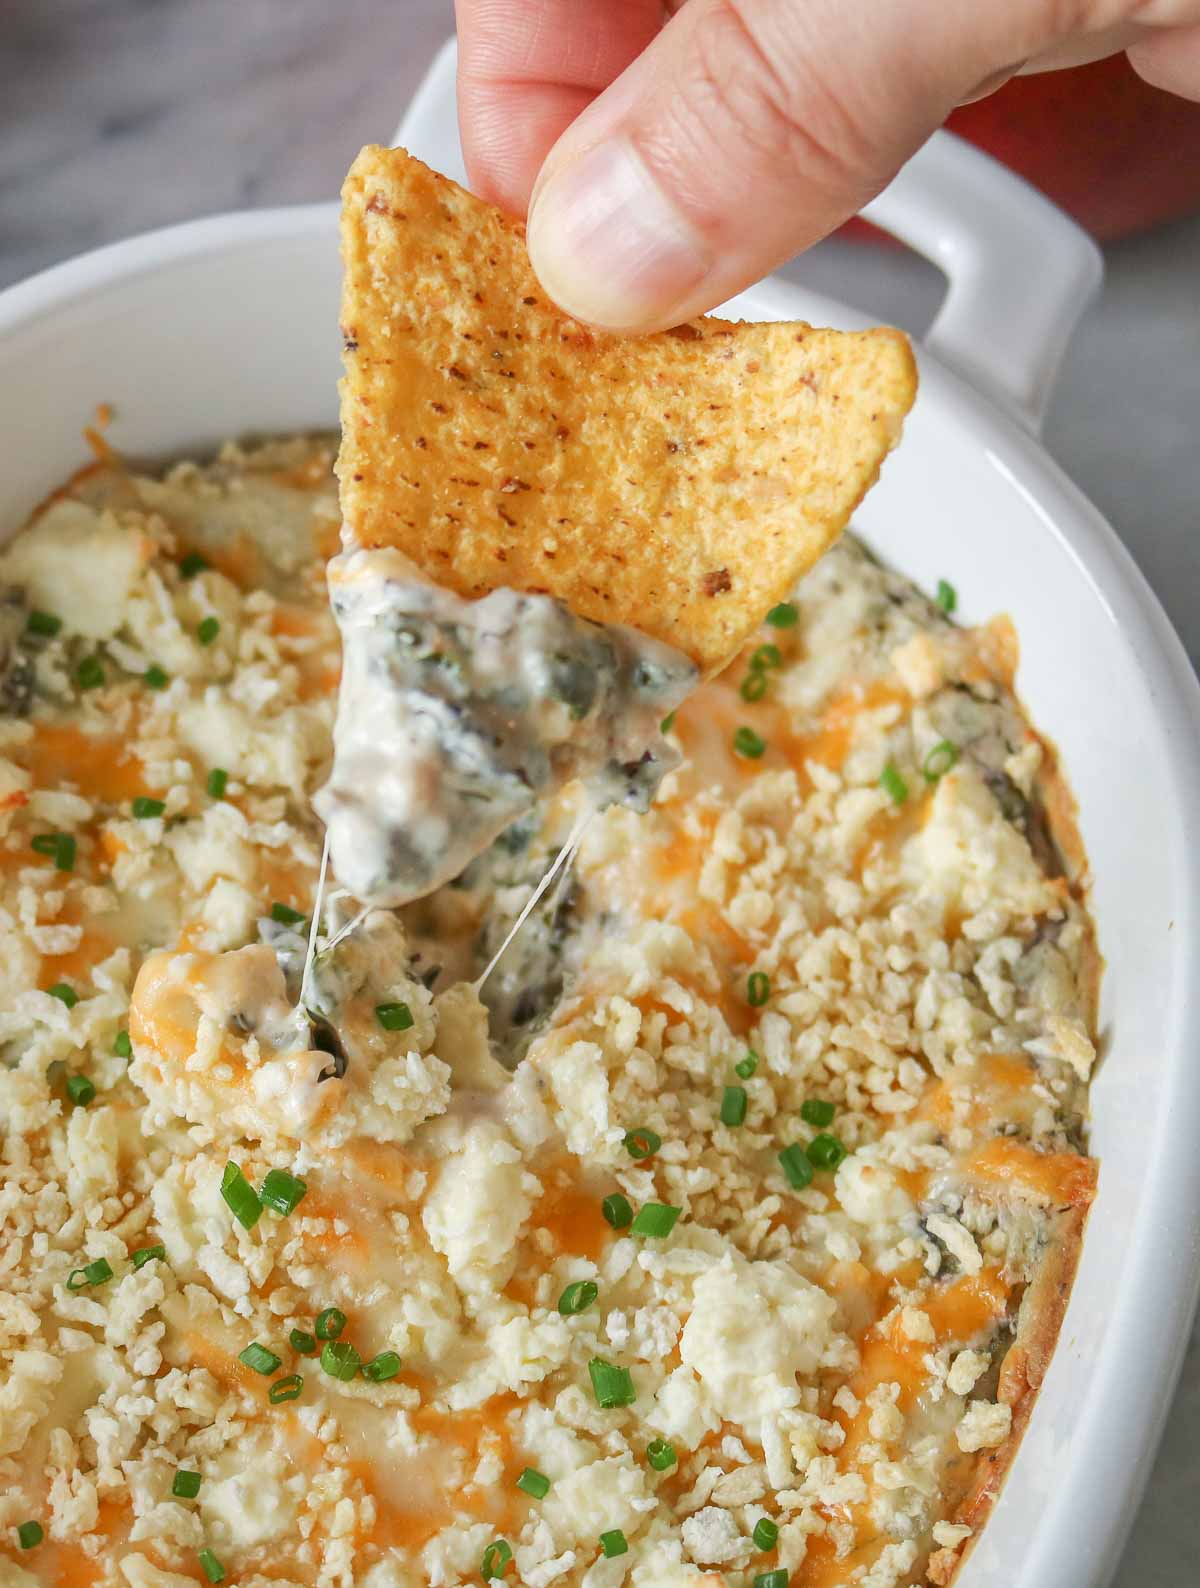 Hand dipping a tortilla chip into cheesy baked kale dip.